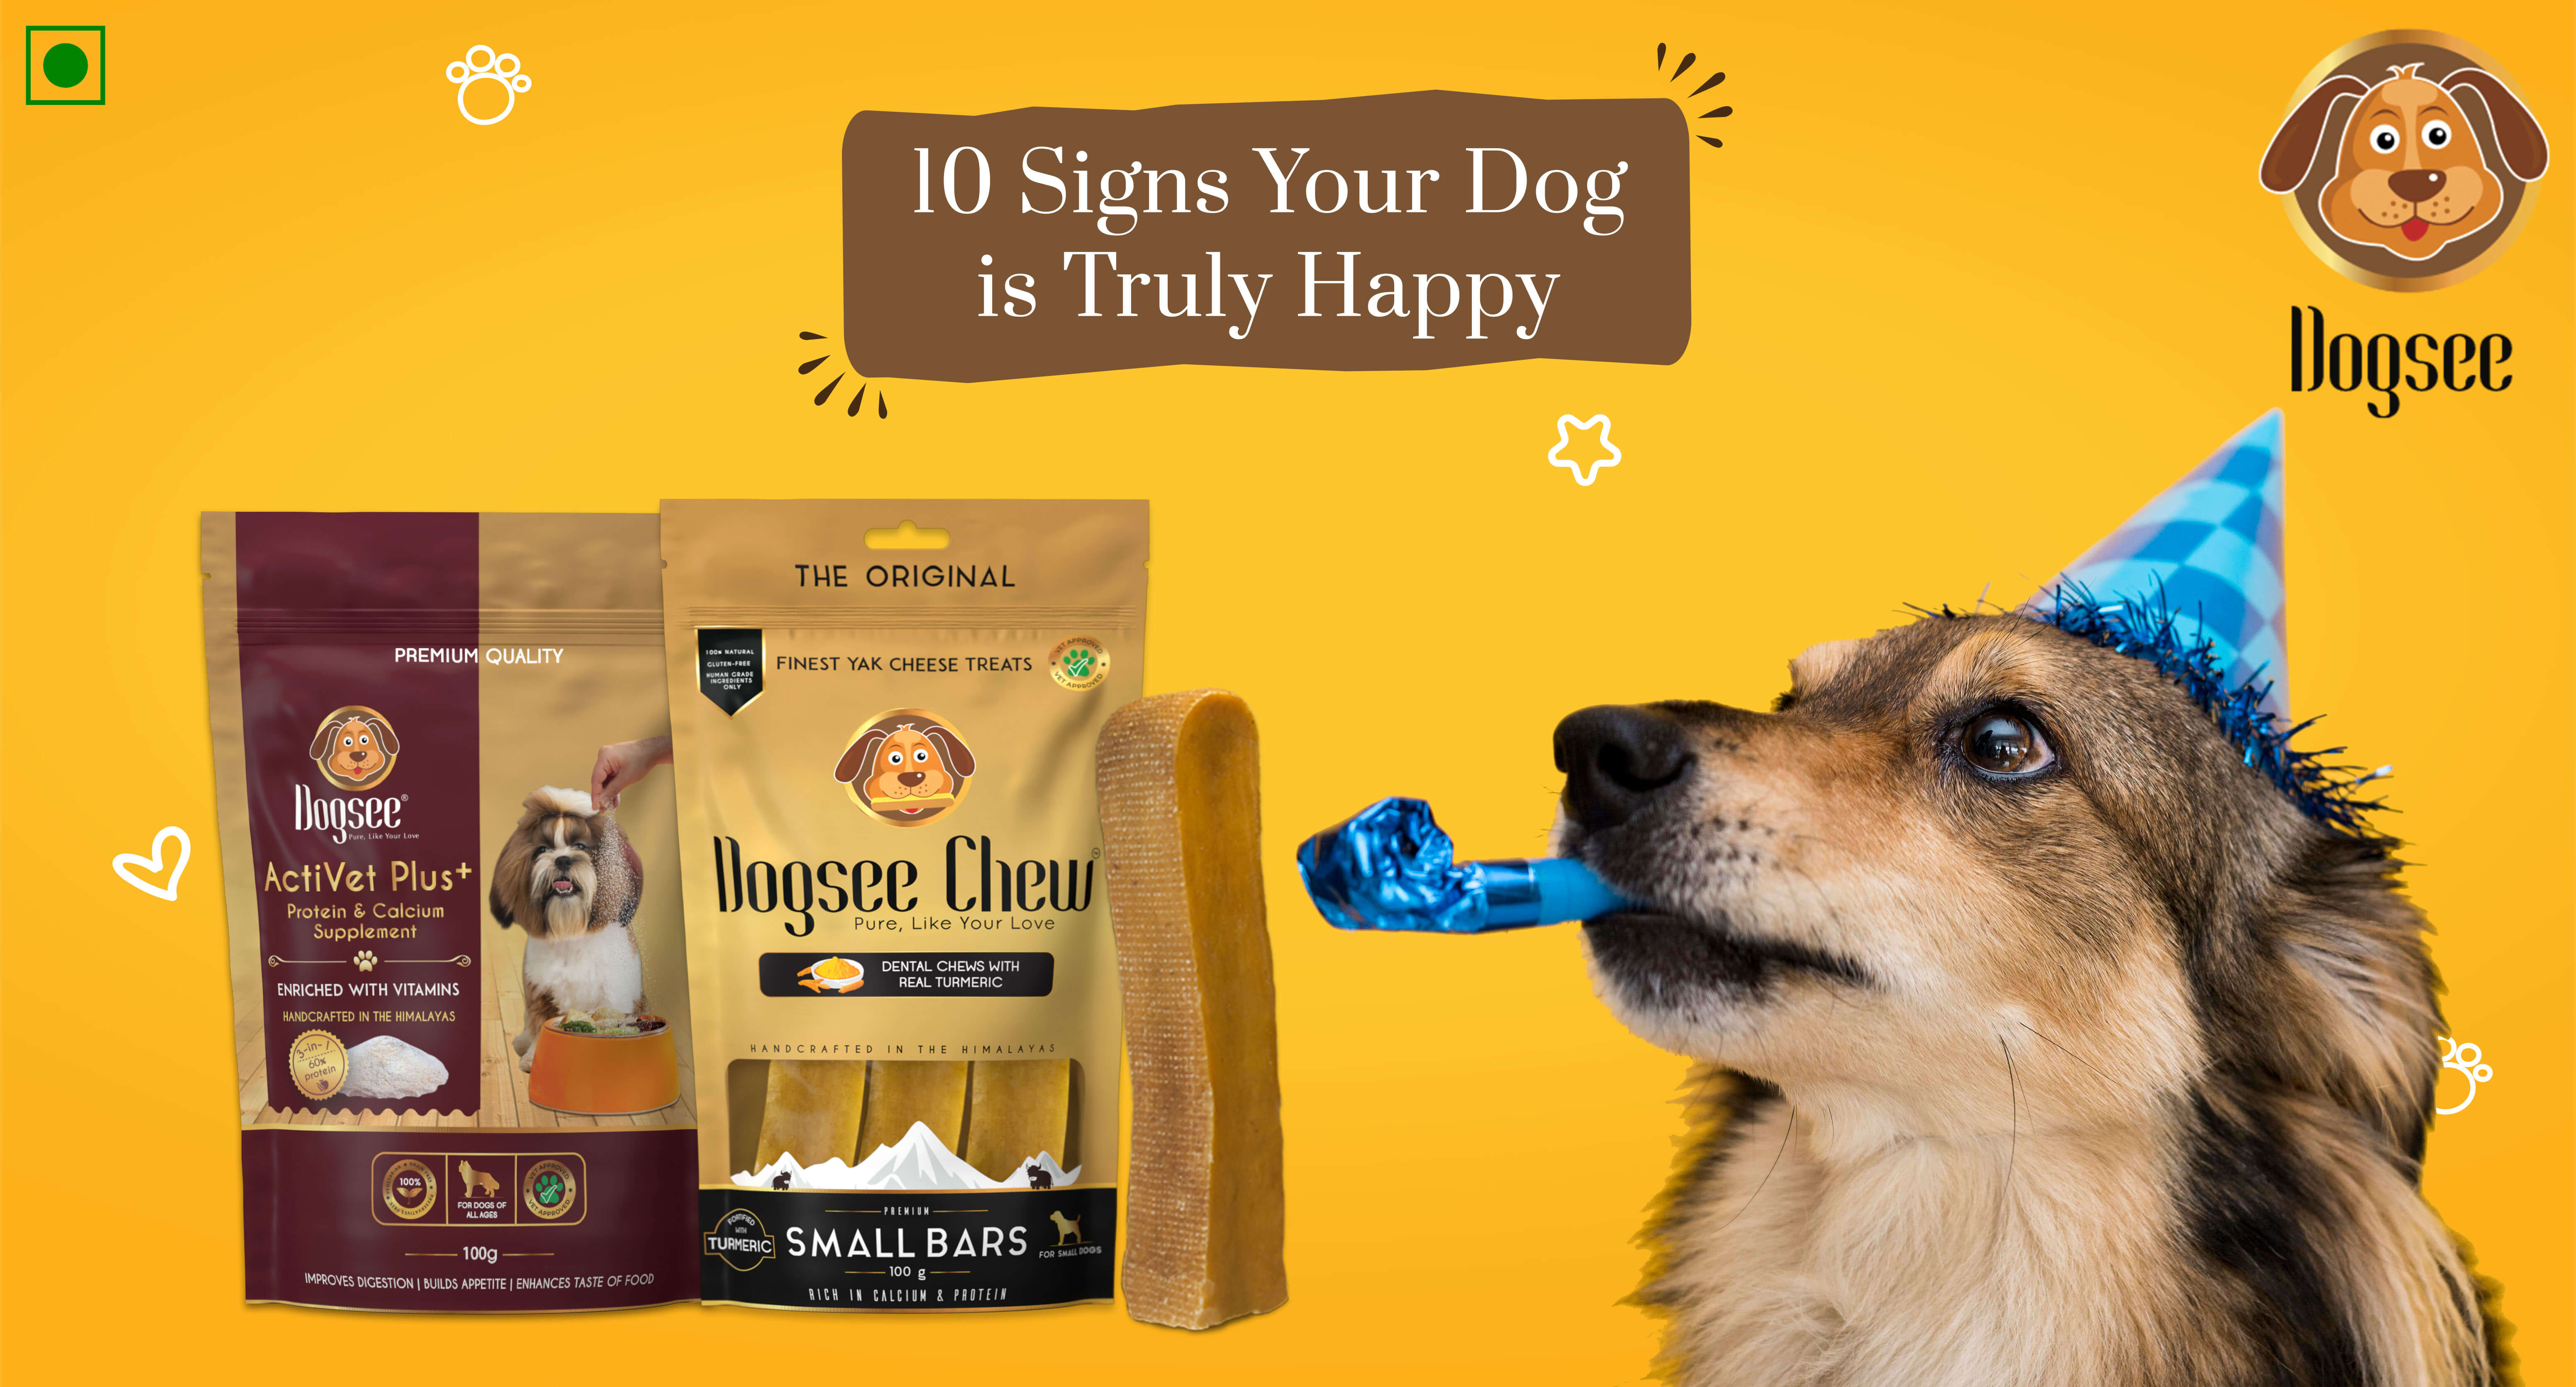 10 Signs Your Dog is Truly Happy